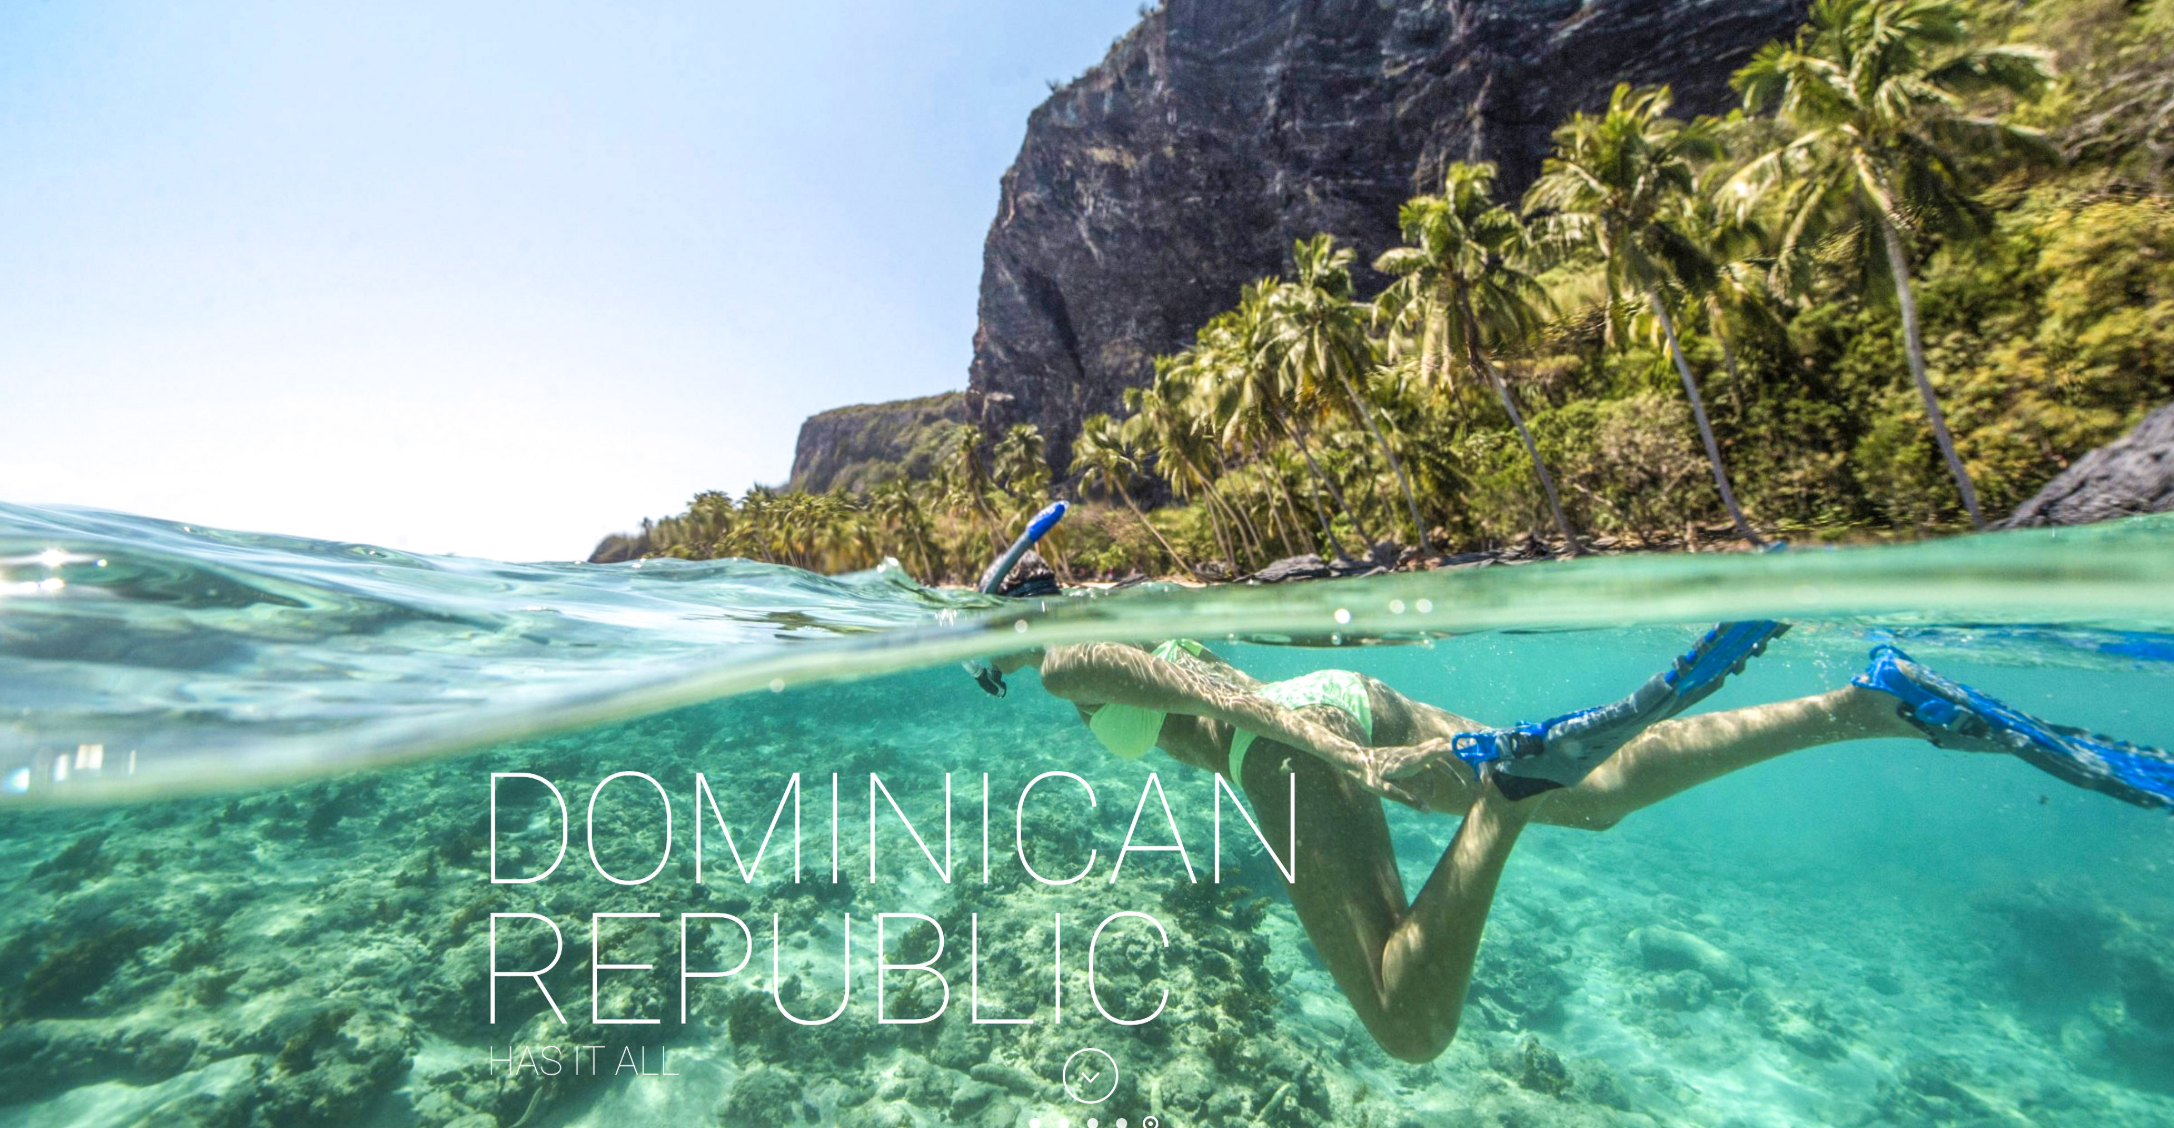 NYX Awards 2019 Winner - Dominican Republic Tourism Official Website